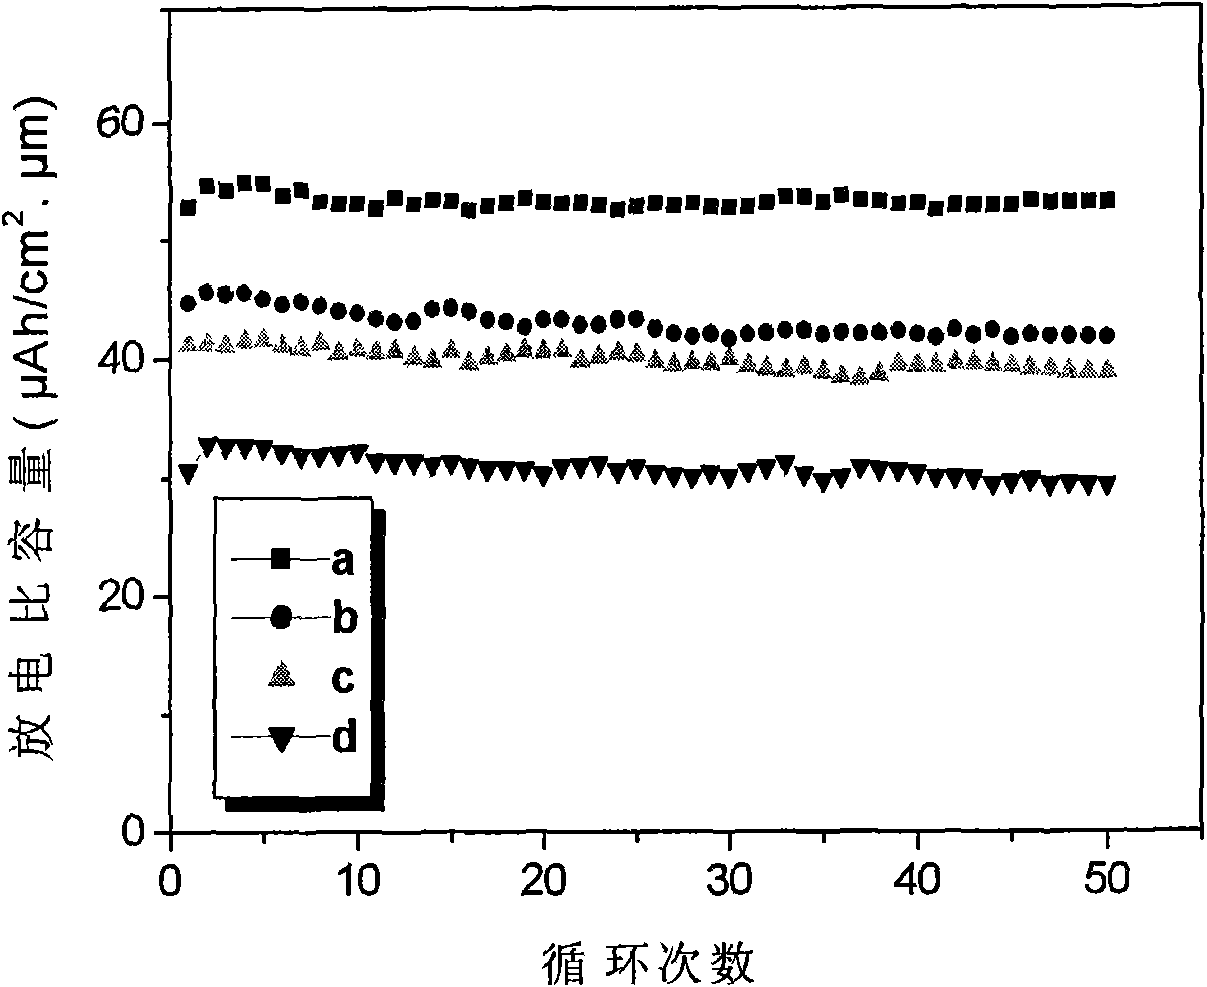 Preparation method of nano-silver particle dispersed Li*Ti*O* thin film lithium ion battery negative electrode